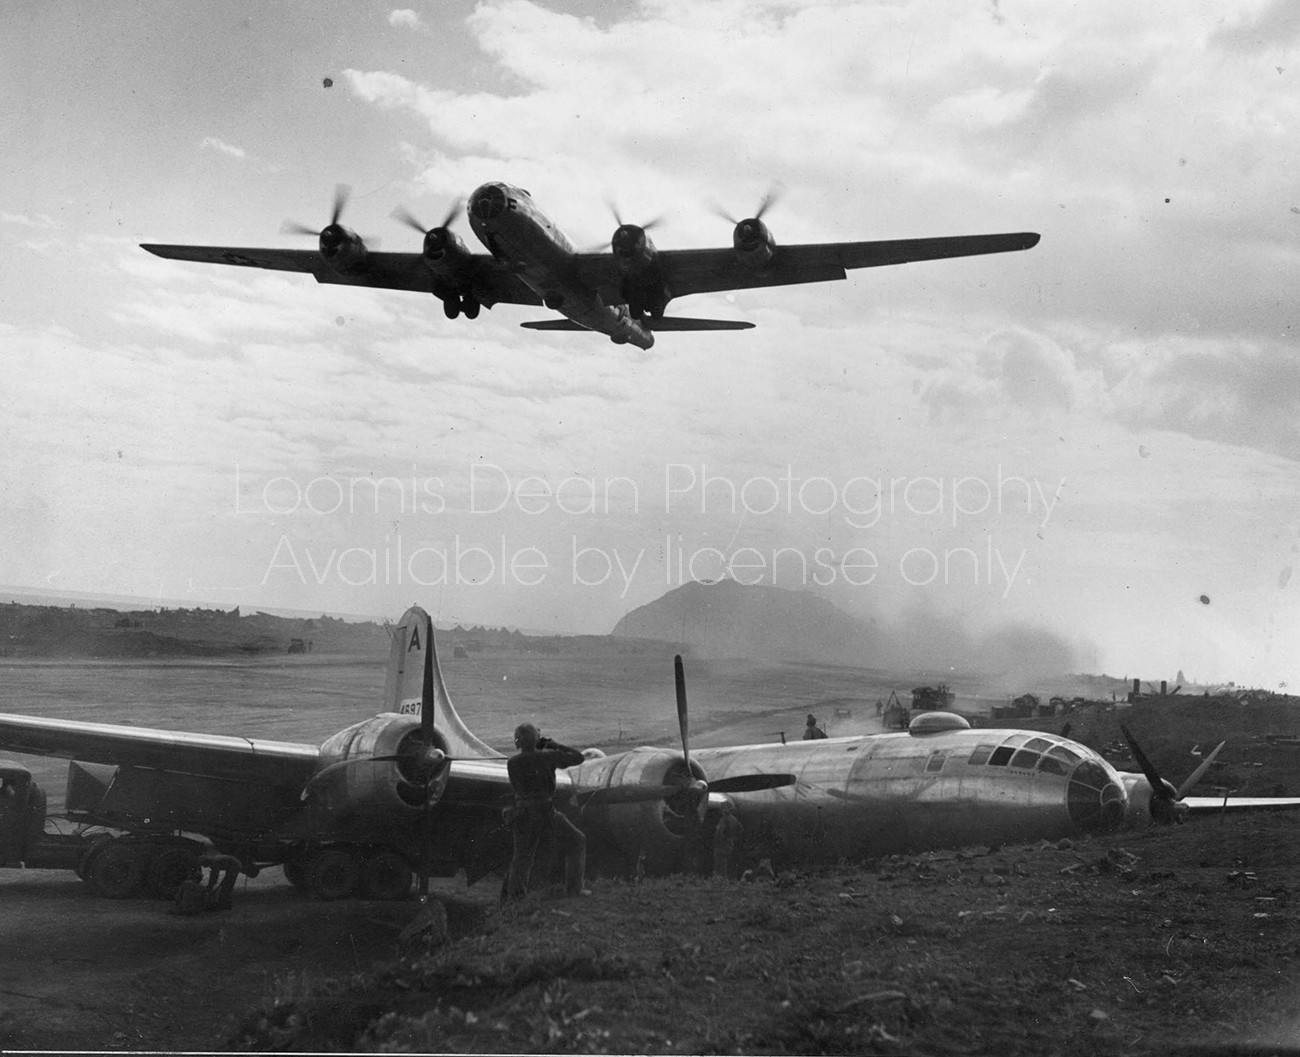 CRASHED U.S. AIR FORCE B29 PACIFIC THEATER 115 